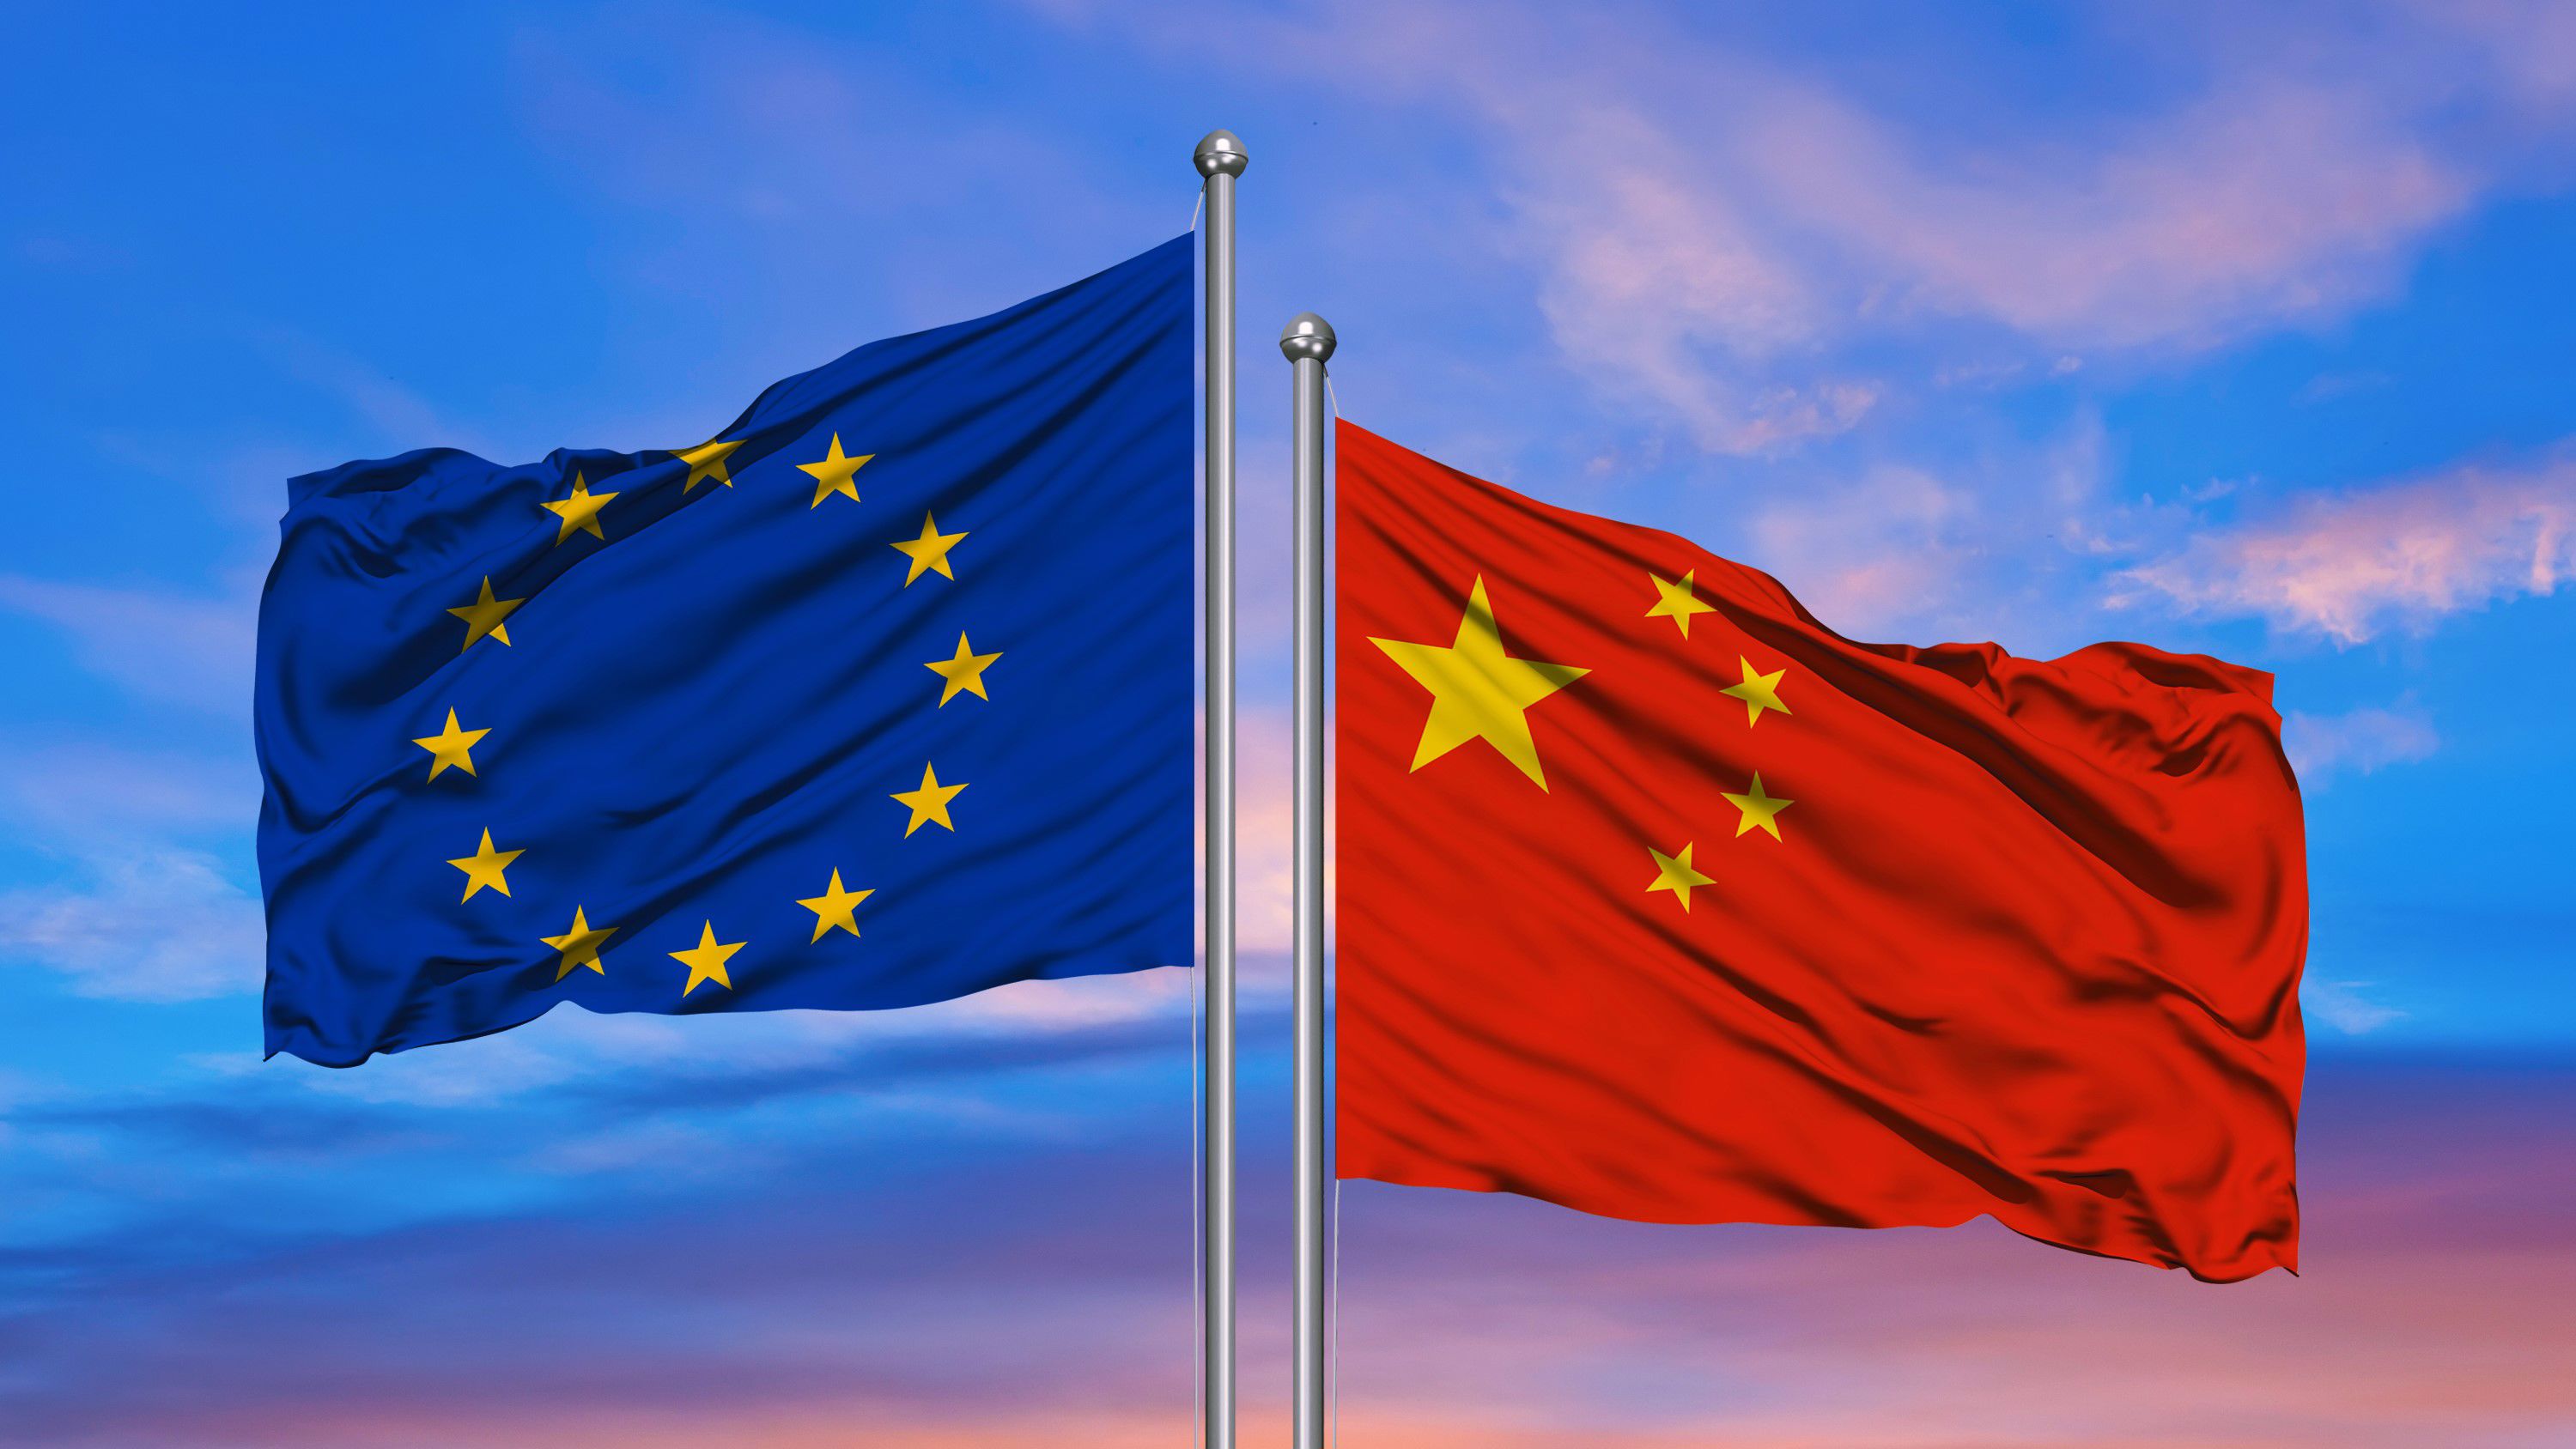 Stronger human rights safeguards in EU-China Comprehensive Agreement on Investment needed